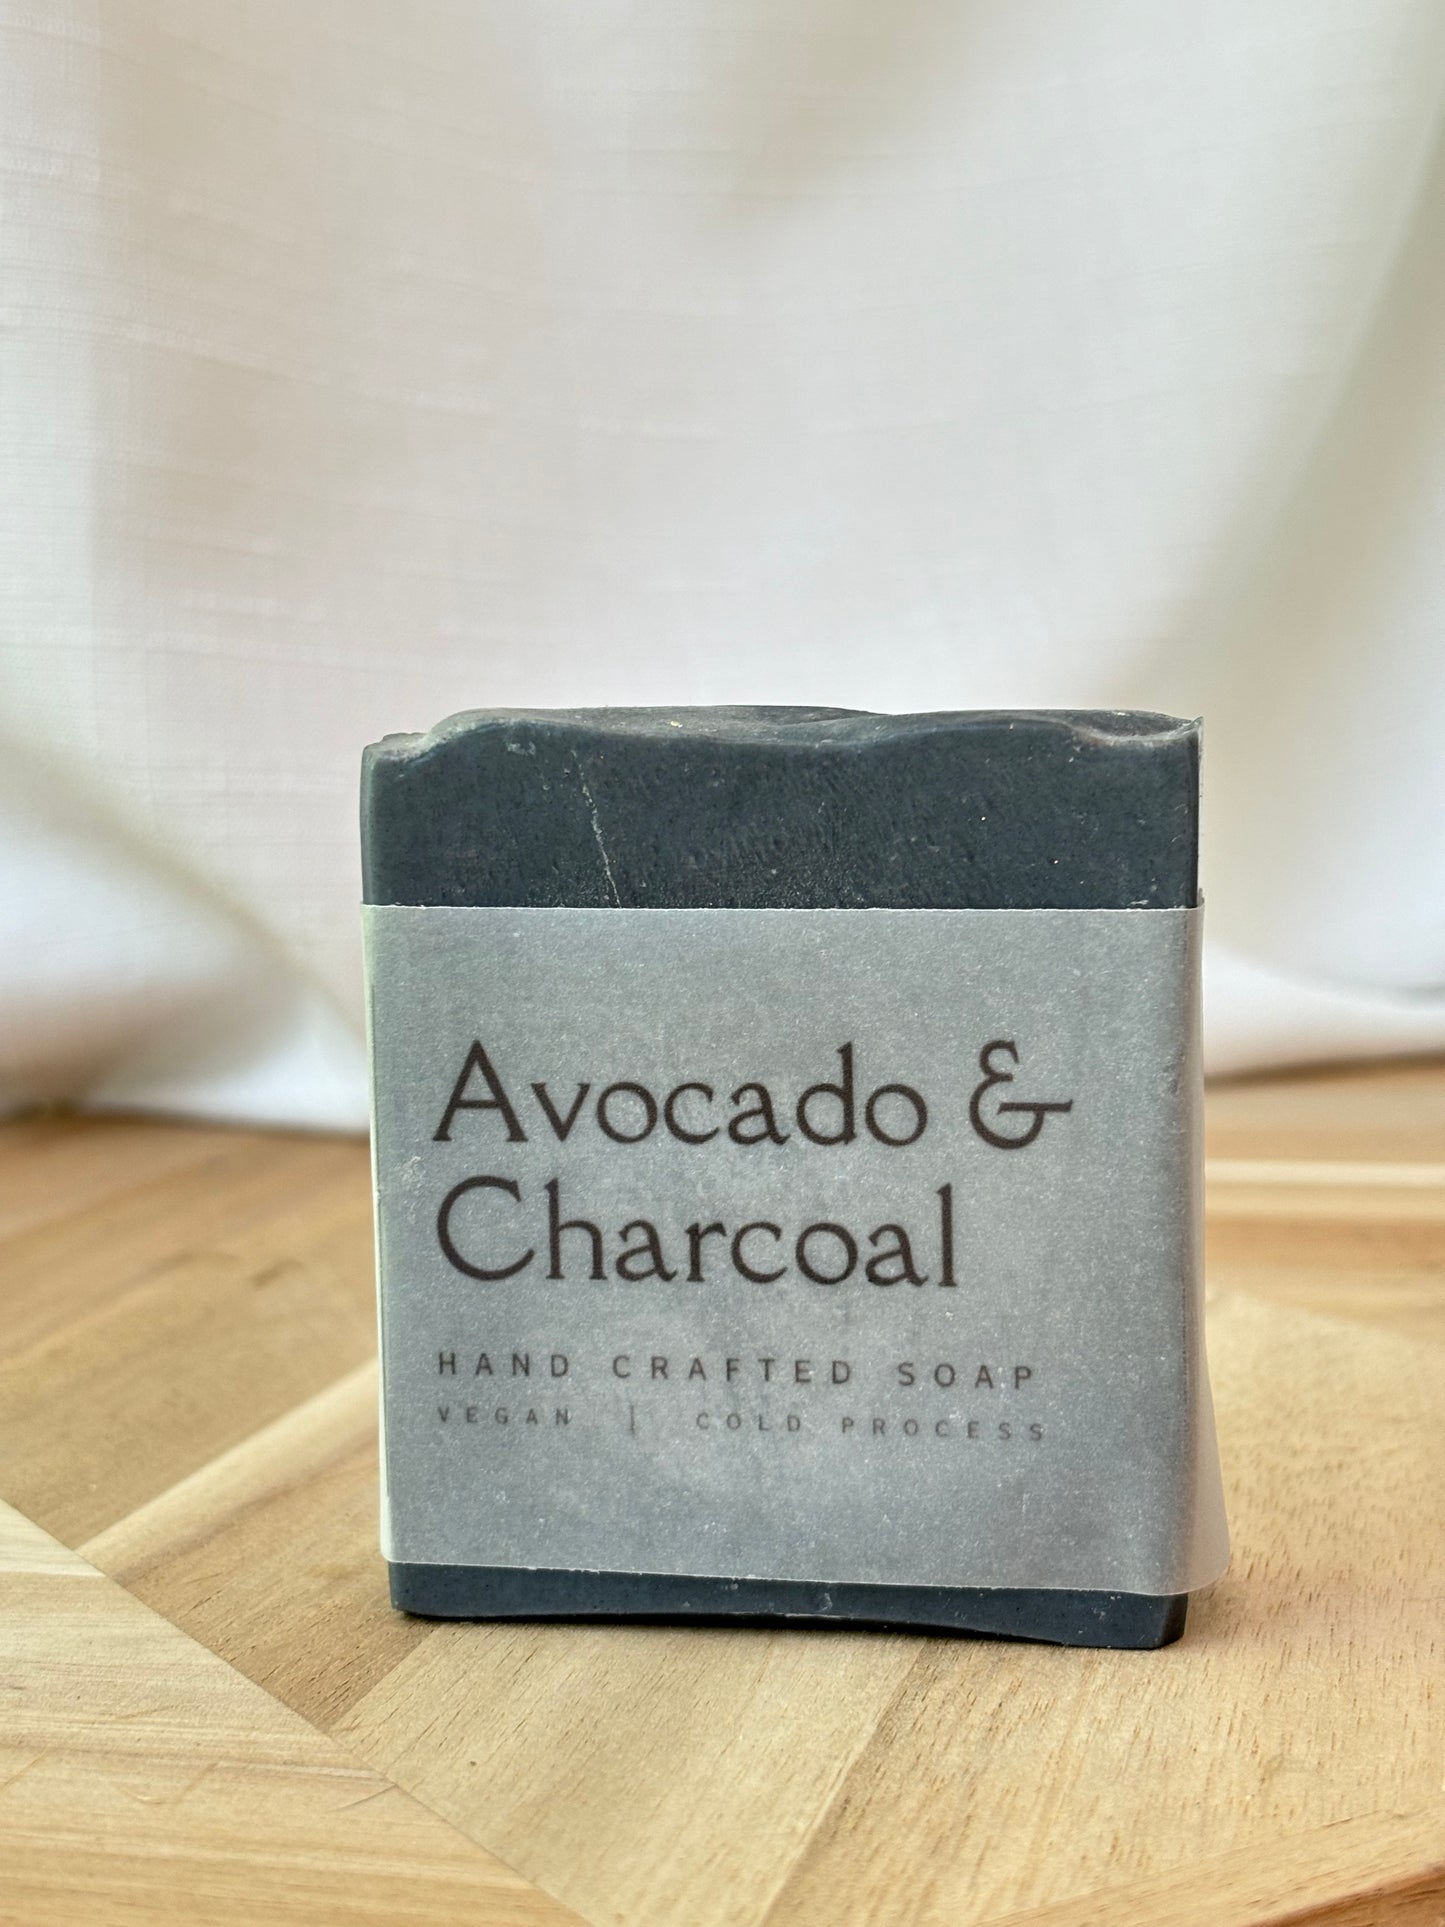 Activated Charcoal & Avocado